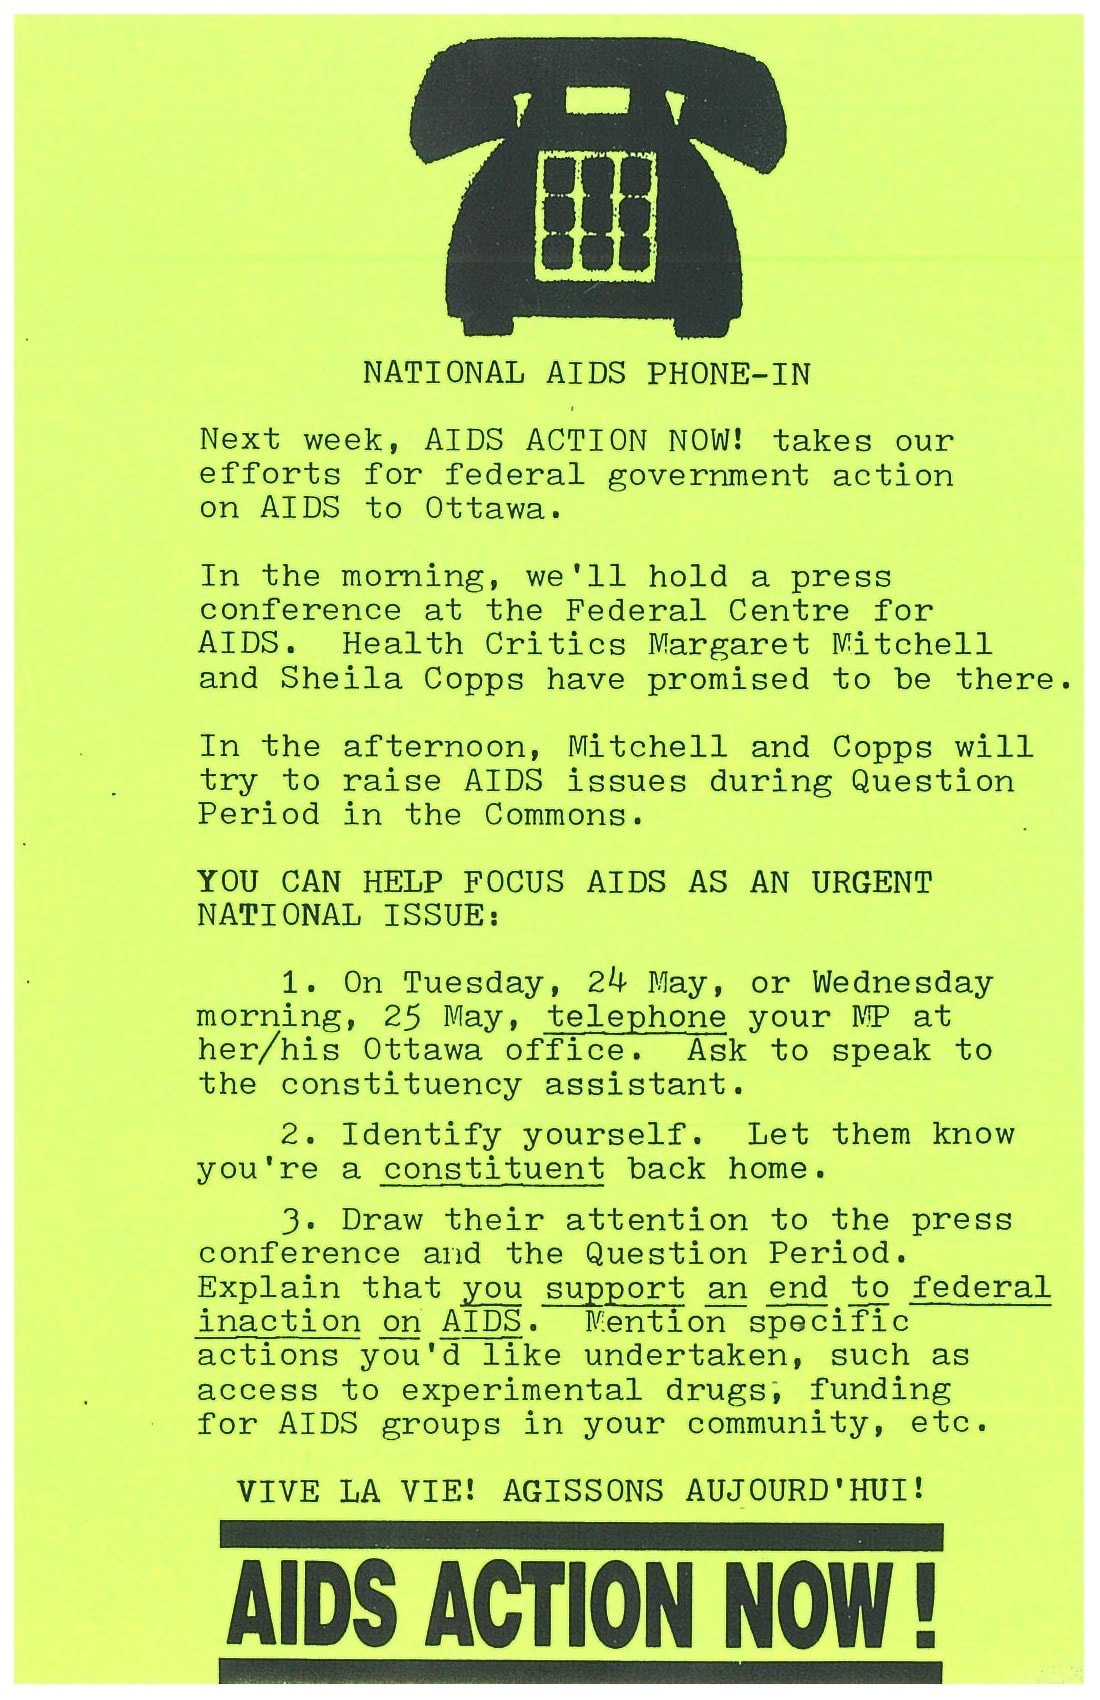 Typewritten flyer with a simple illustration of a desk phone at the top and “AIDS Action Now!” written in all caps at the bottom.